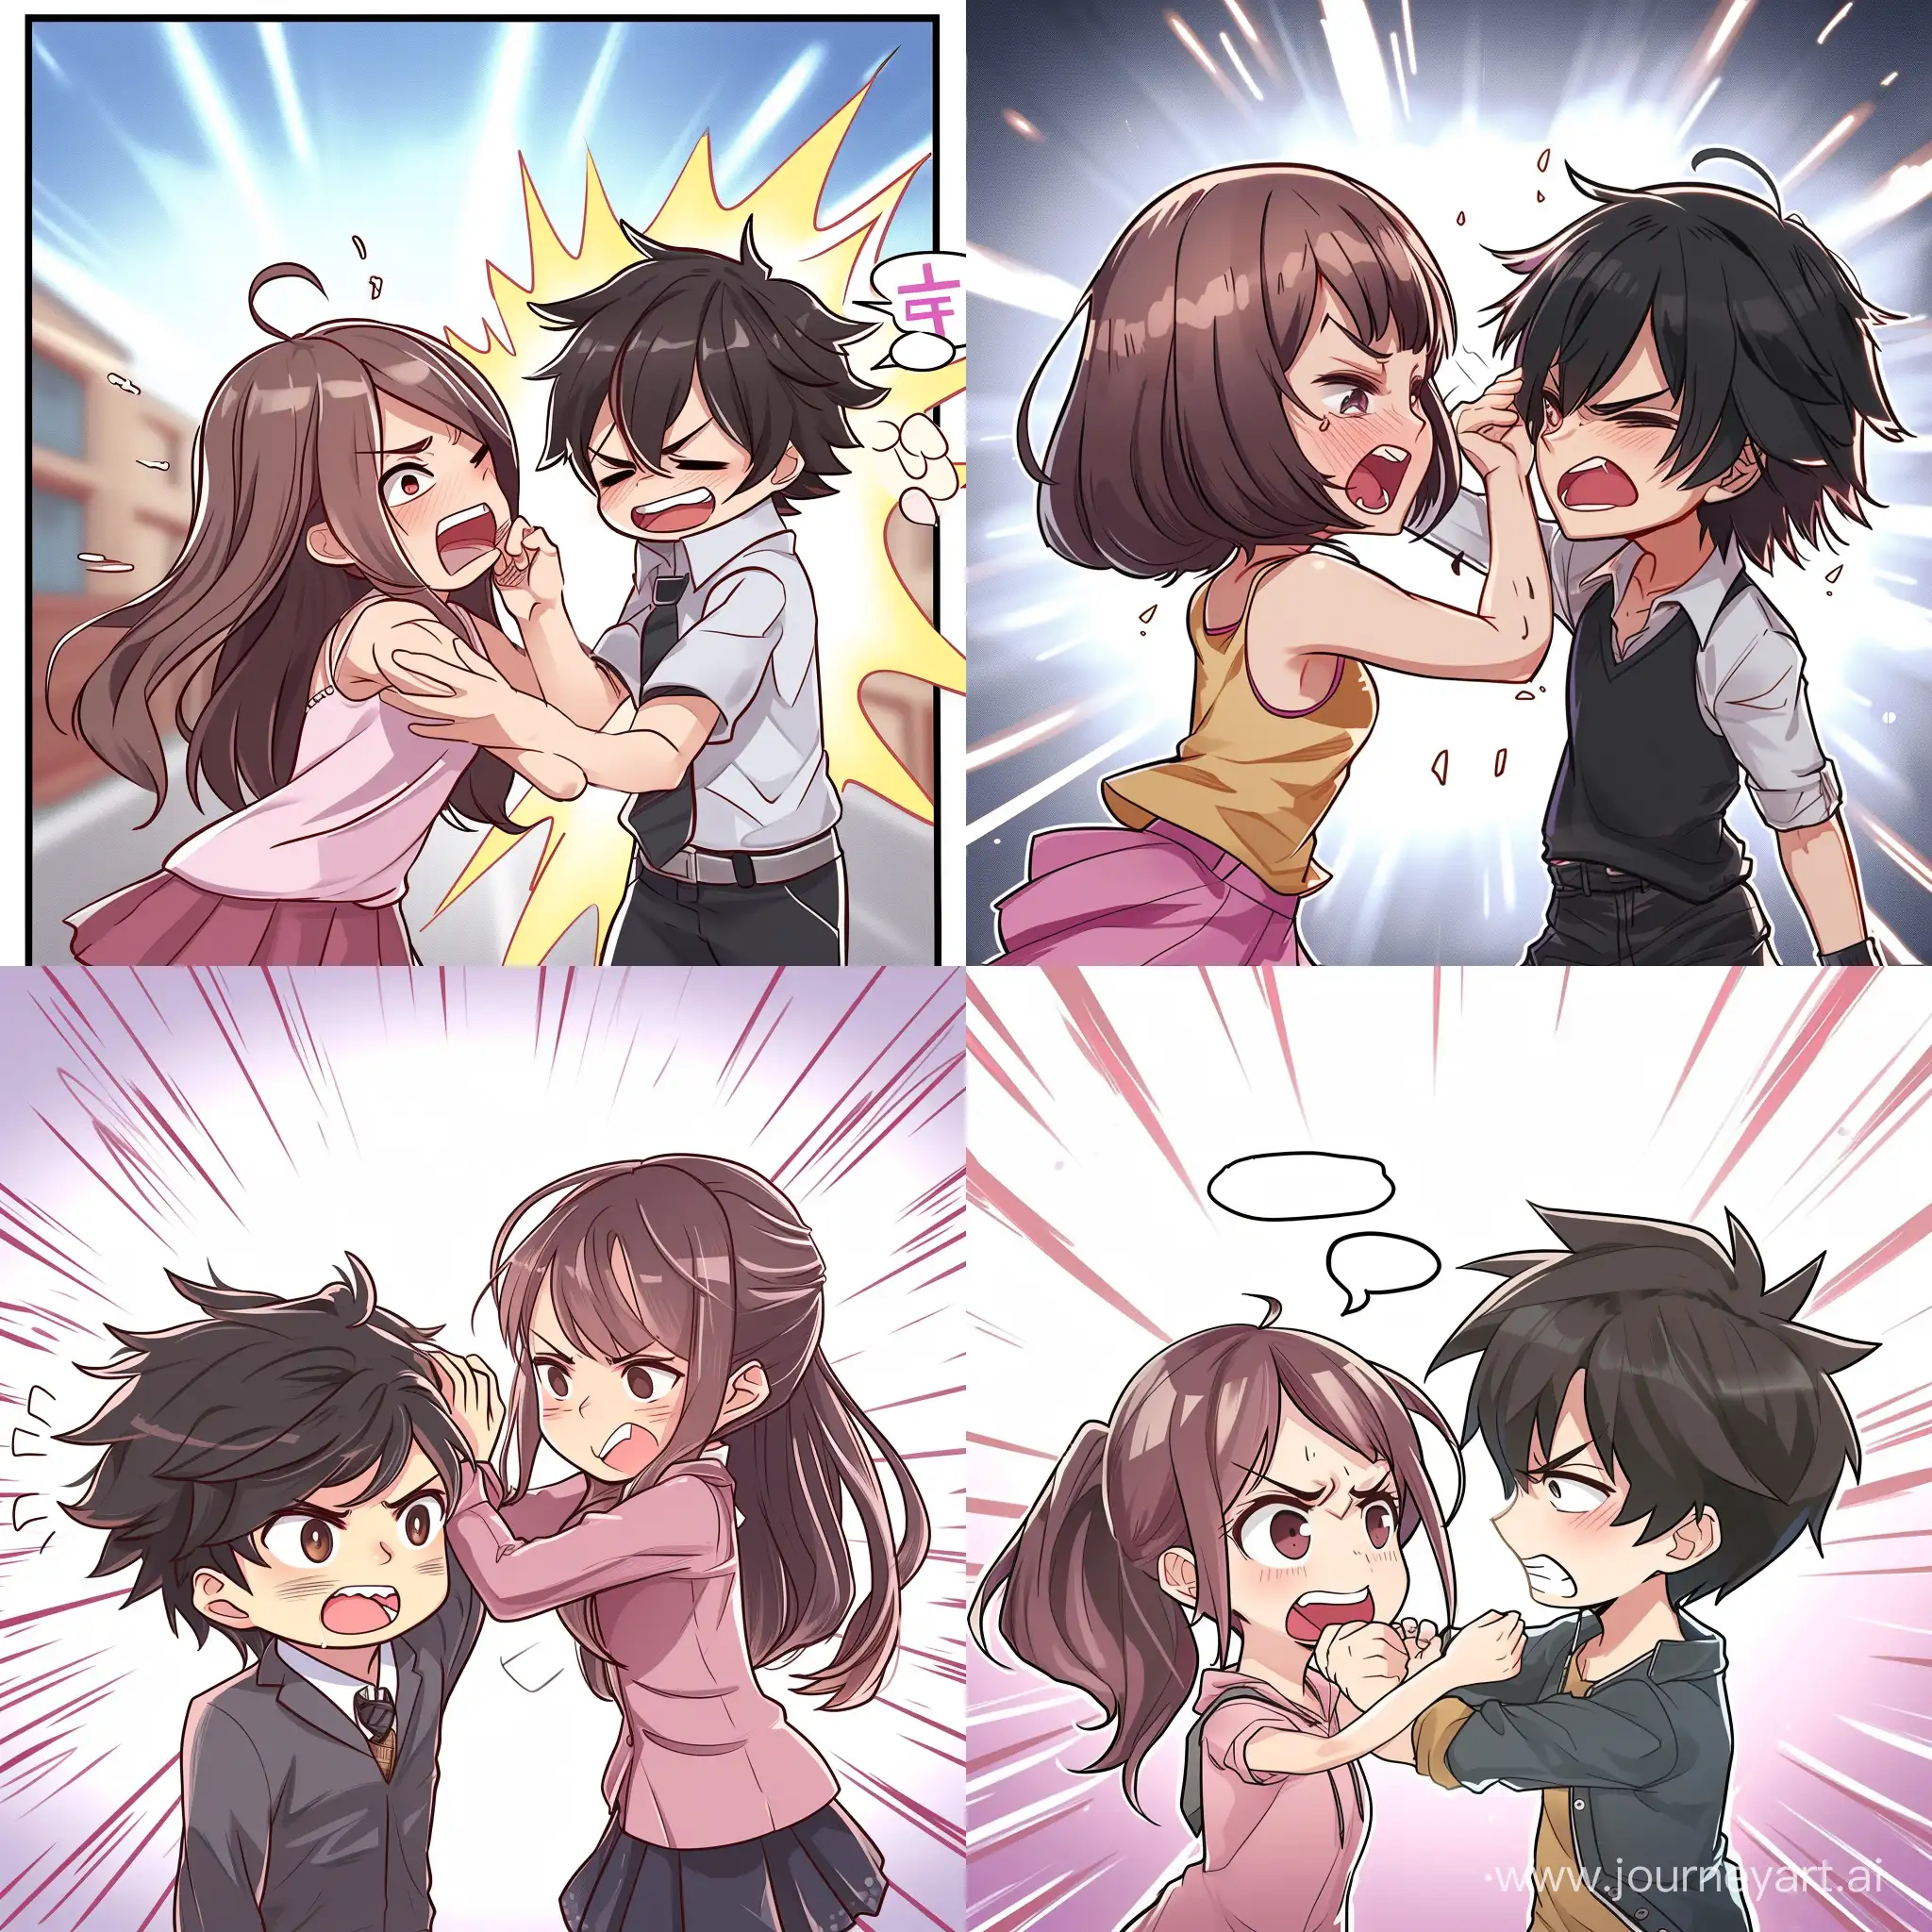 Chibi-Style-Girl-Slapping-Boy-with-Motion-Blur